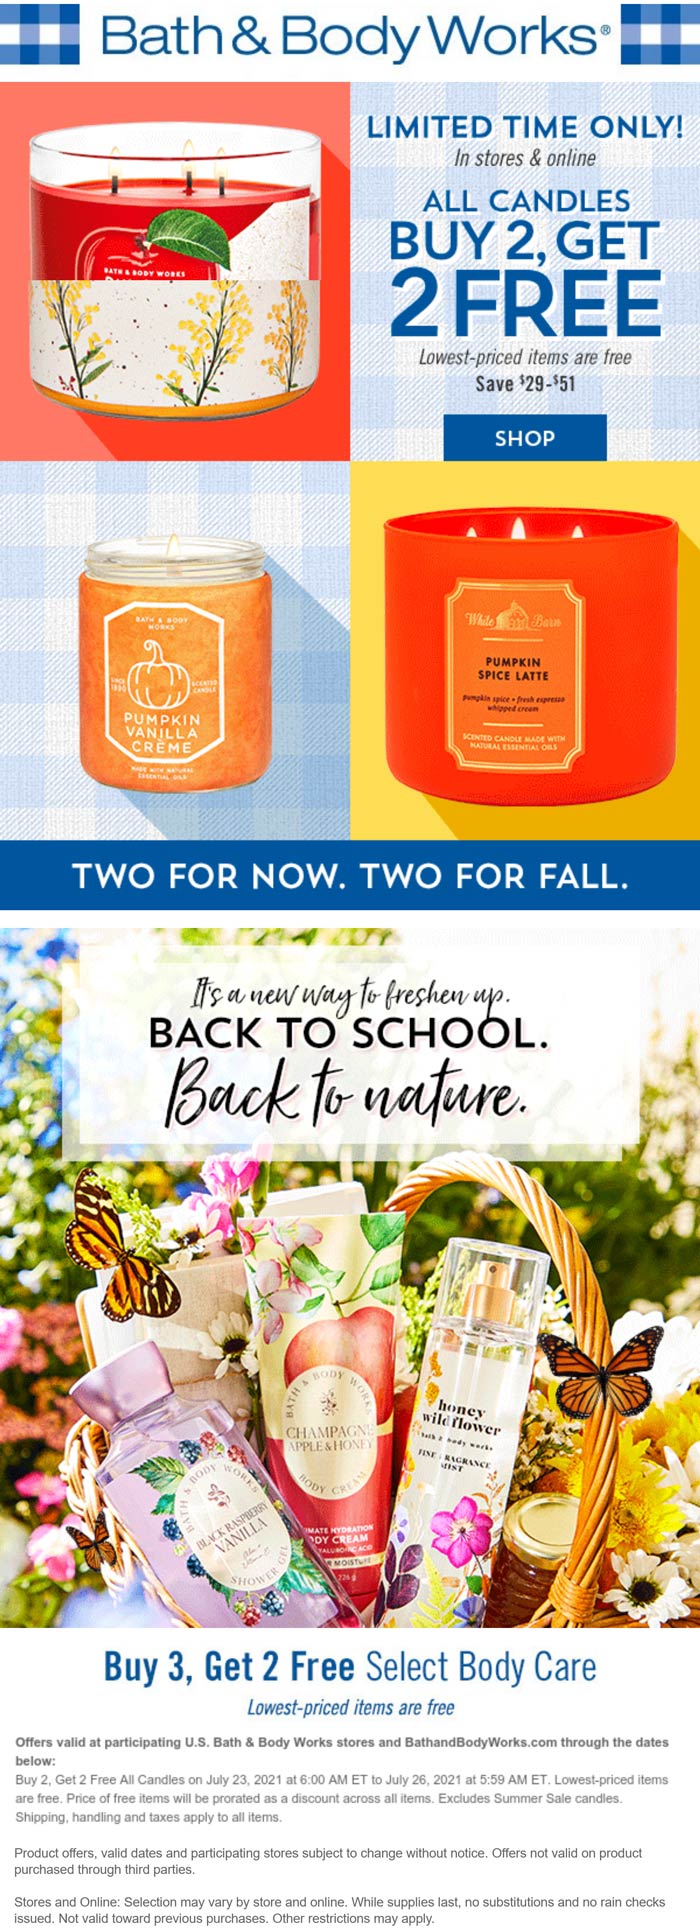 Bath & Body Works stores Coupon  4-for-2 on candles & 5-for-3 on body care at Bath & Body Works, ditto online #bathbodyworks 